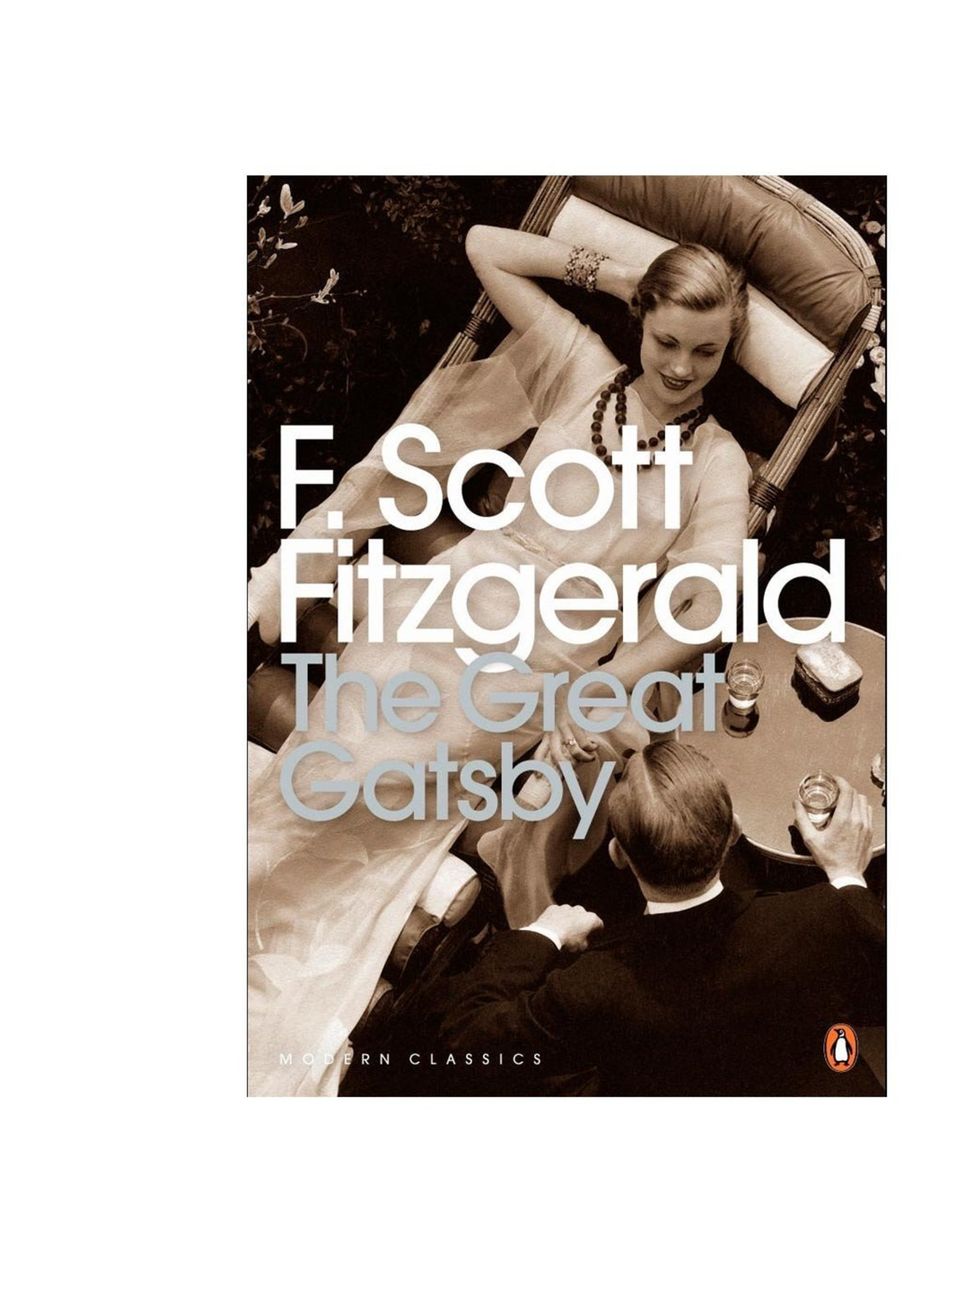 <p><strong>Classic Gatsby:</strong> Hard to believe, but this is Gatsbys fifth reincarnation as a Penguin Modern Classic.</p><p>Injecting a bit of glam into the series, Art Director Jim Stoddarts 2007 modern redesigns included big bold text floating ove